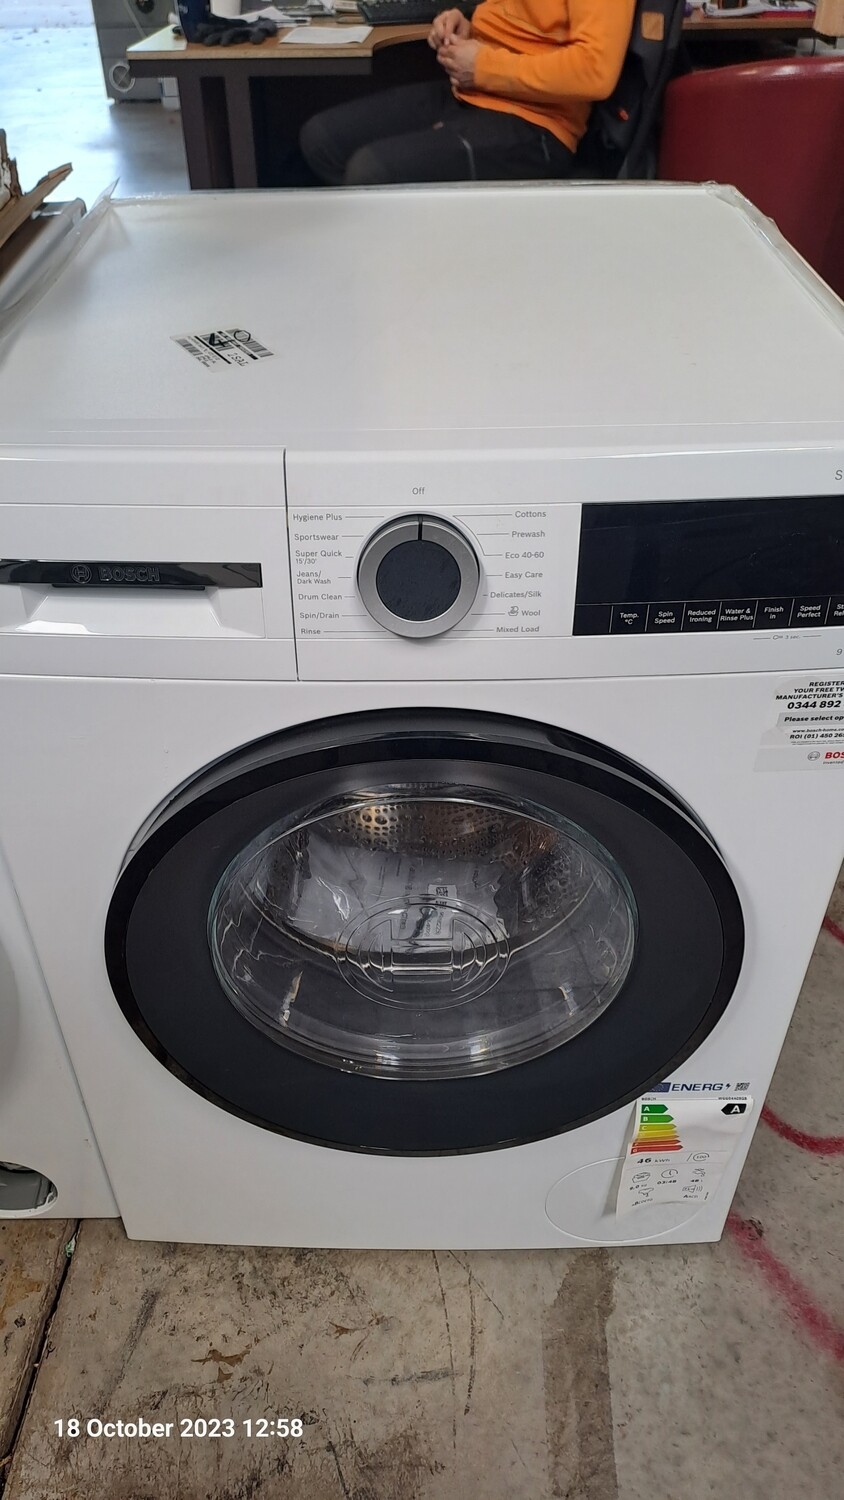 Bosch WGG04409GB 9kg 1400 Washing Machine Brand White New Graded, Located in our Whitby Road shop